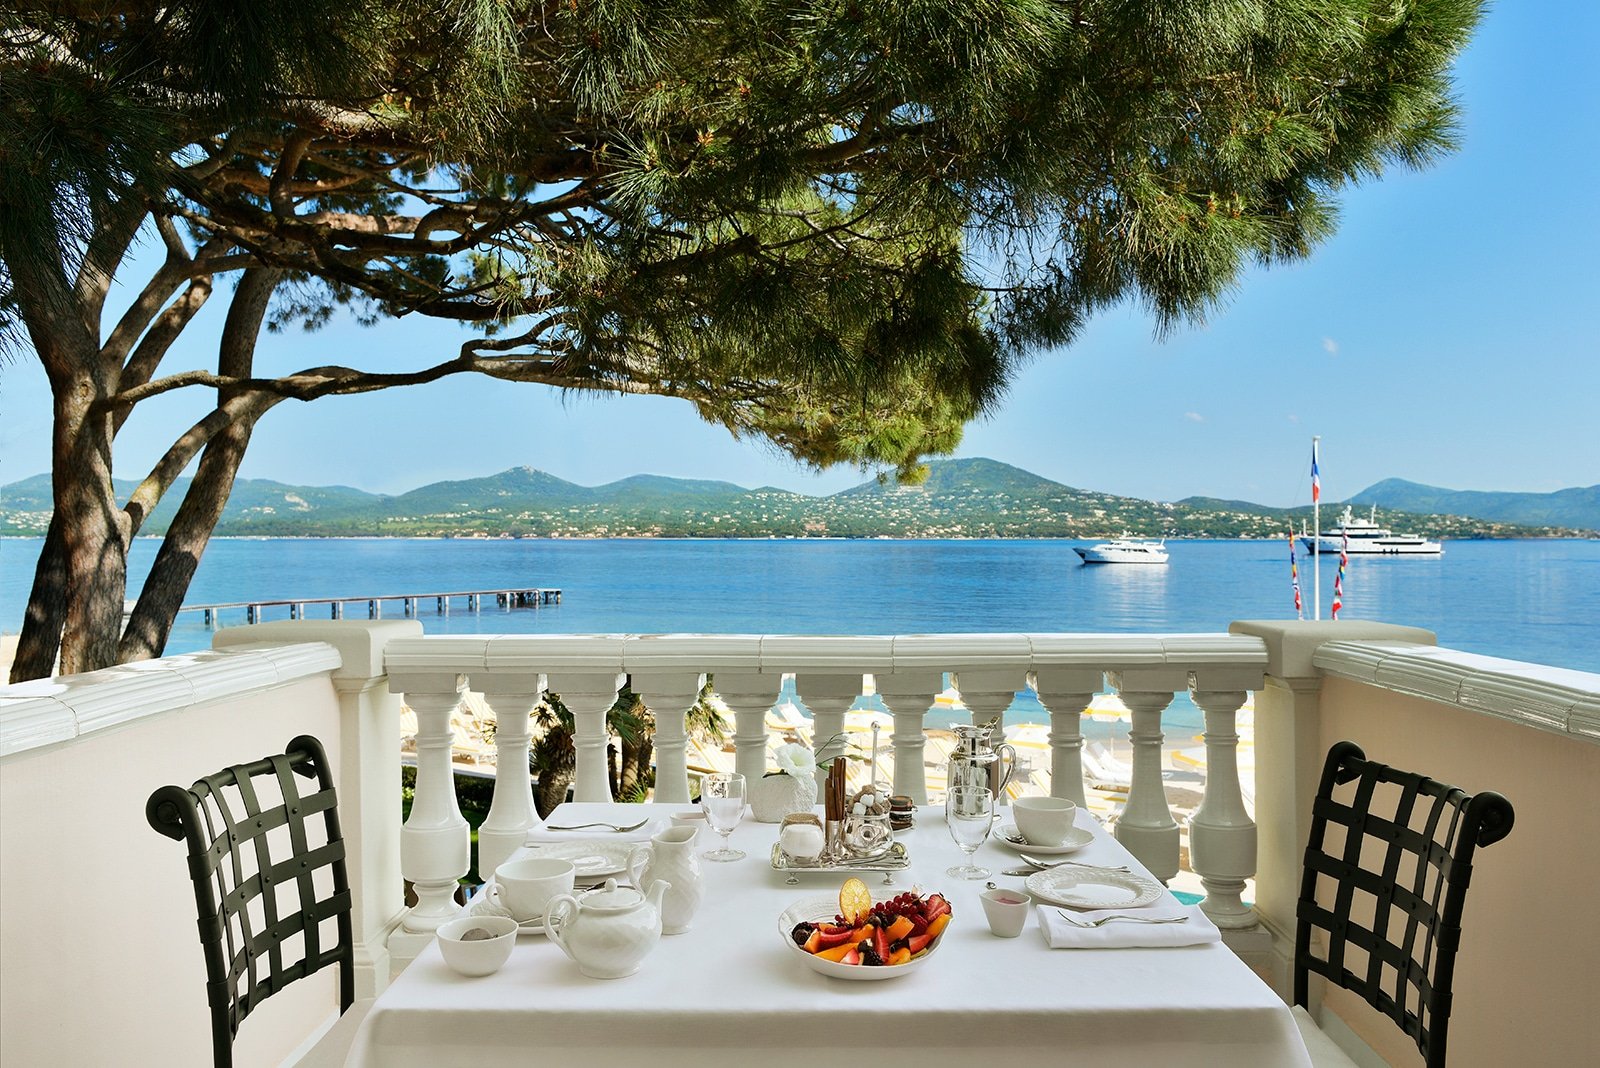 The New Cheval Blanc in Saint-Tropez is the Height of French Riviera Chic